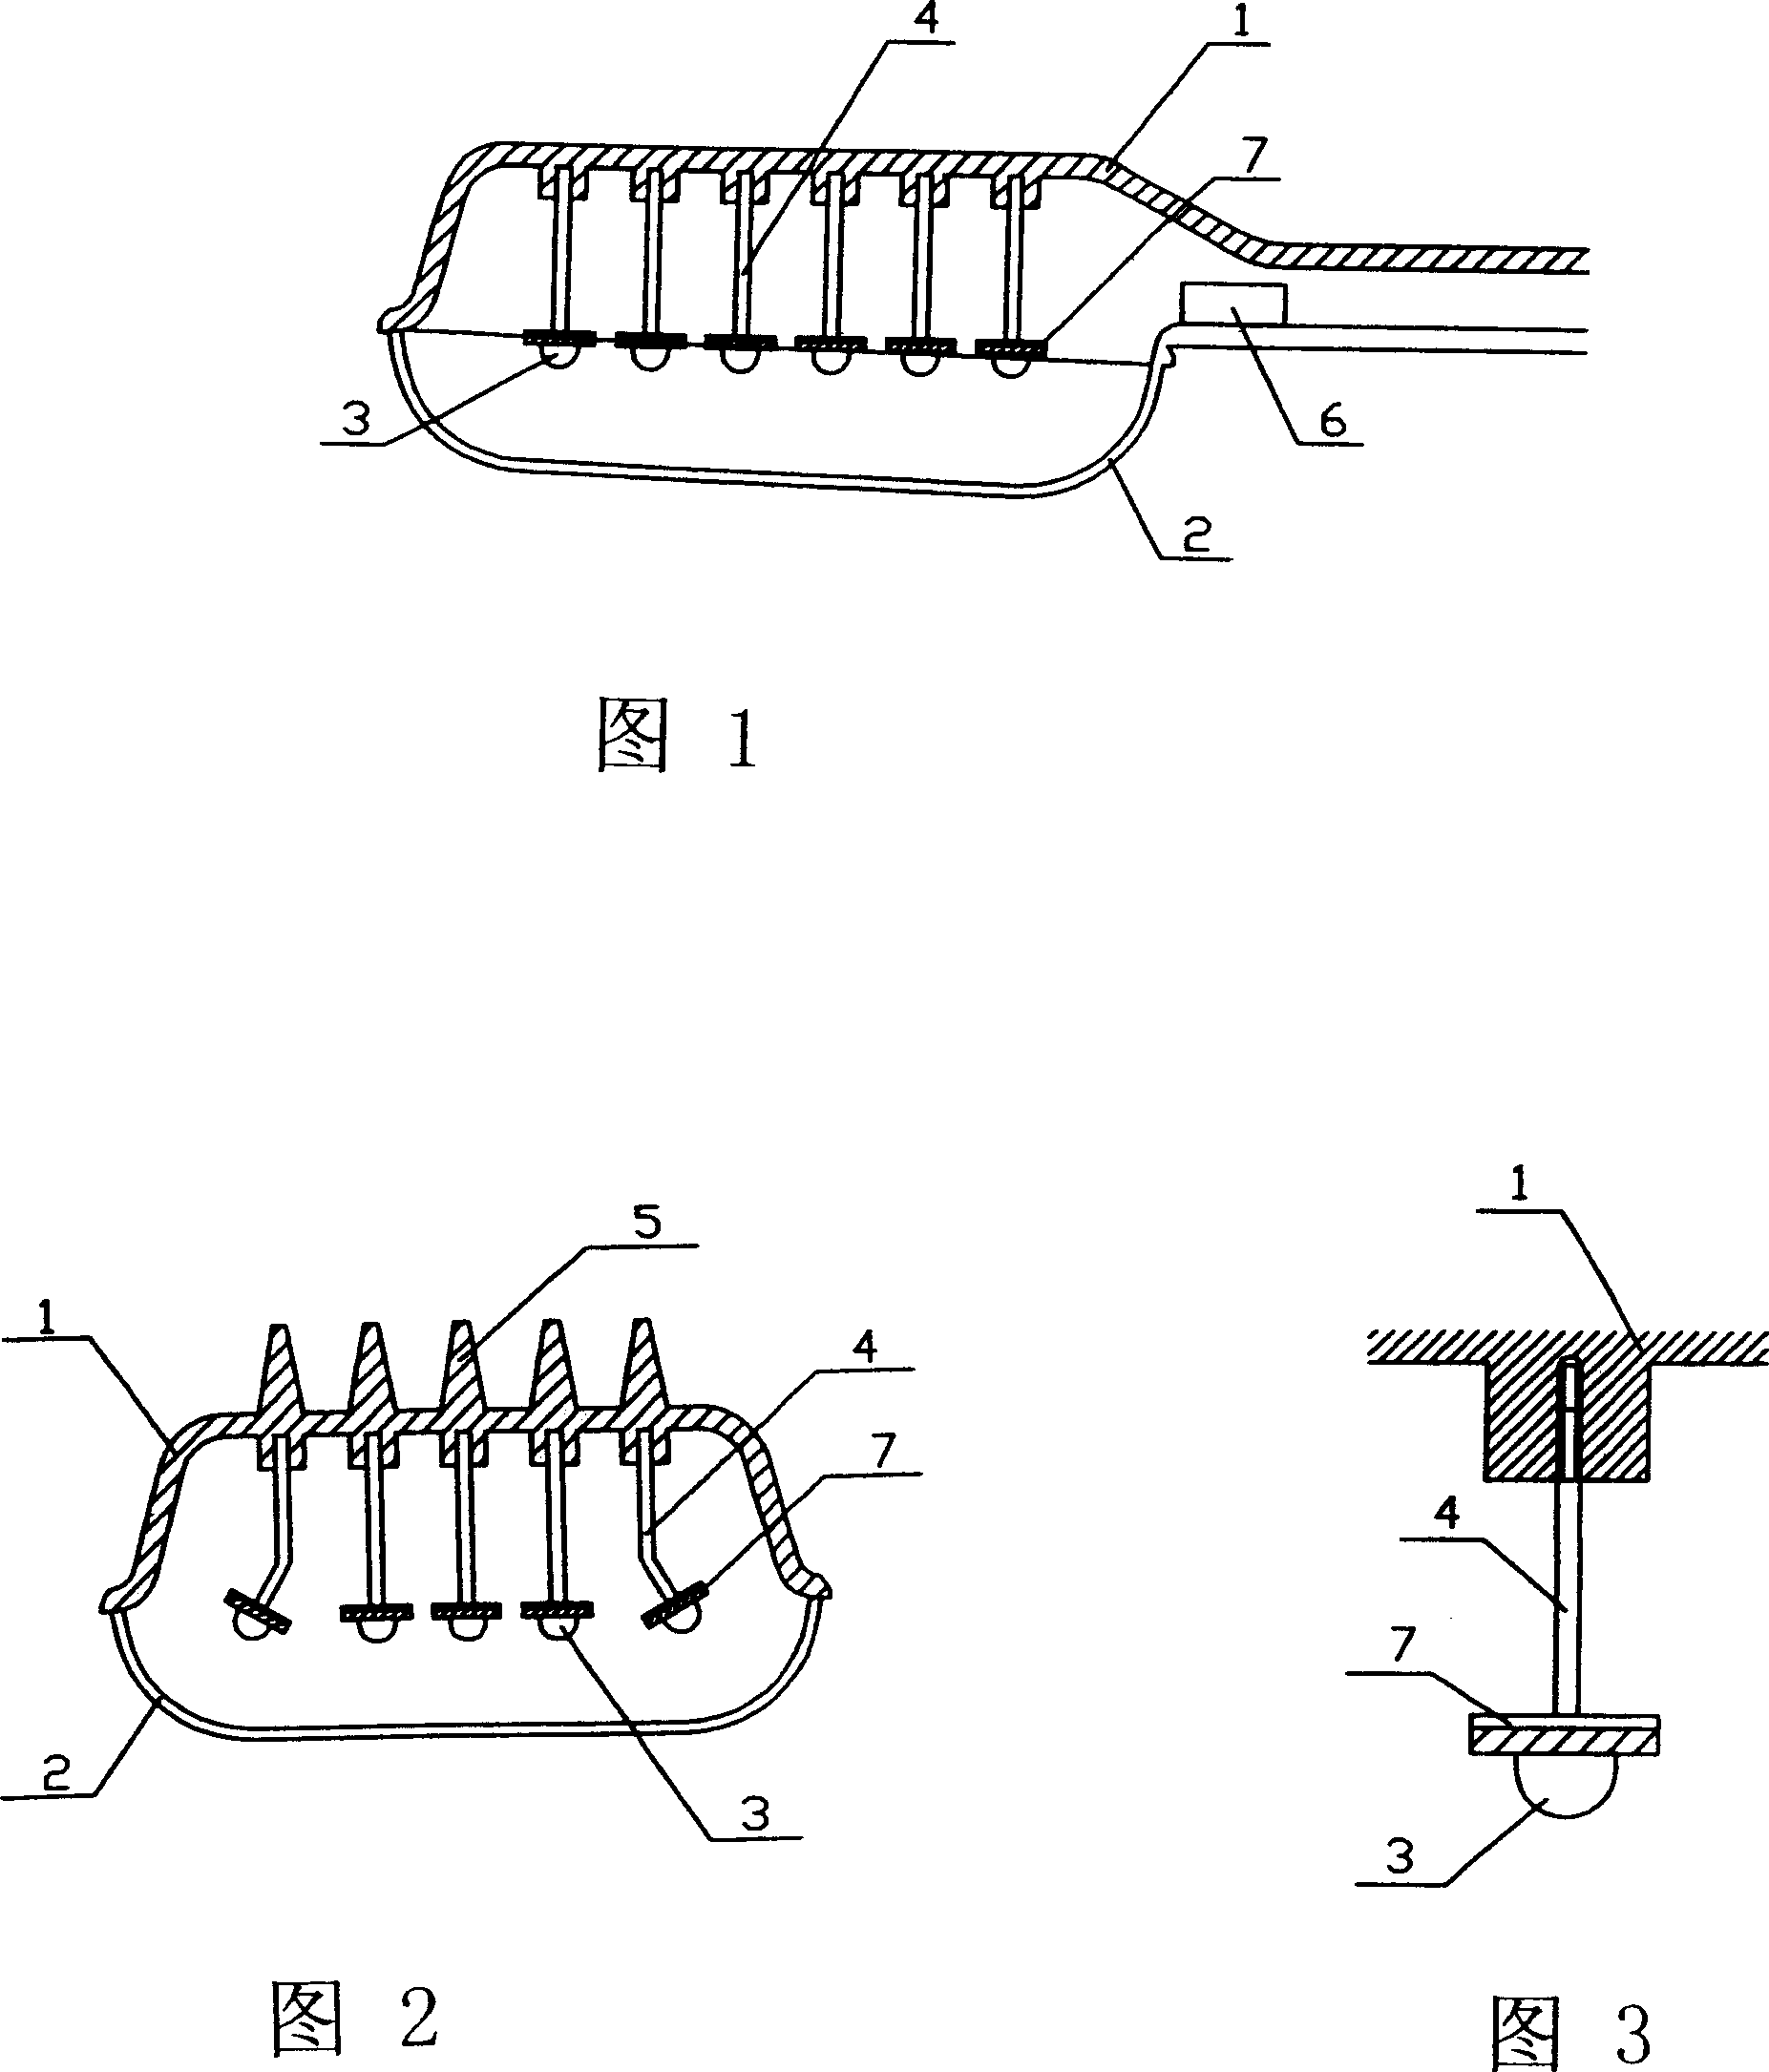 Highpower light emitting diode light fixture with heat being eliminated by superconductive heat pipe